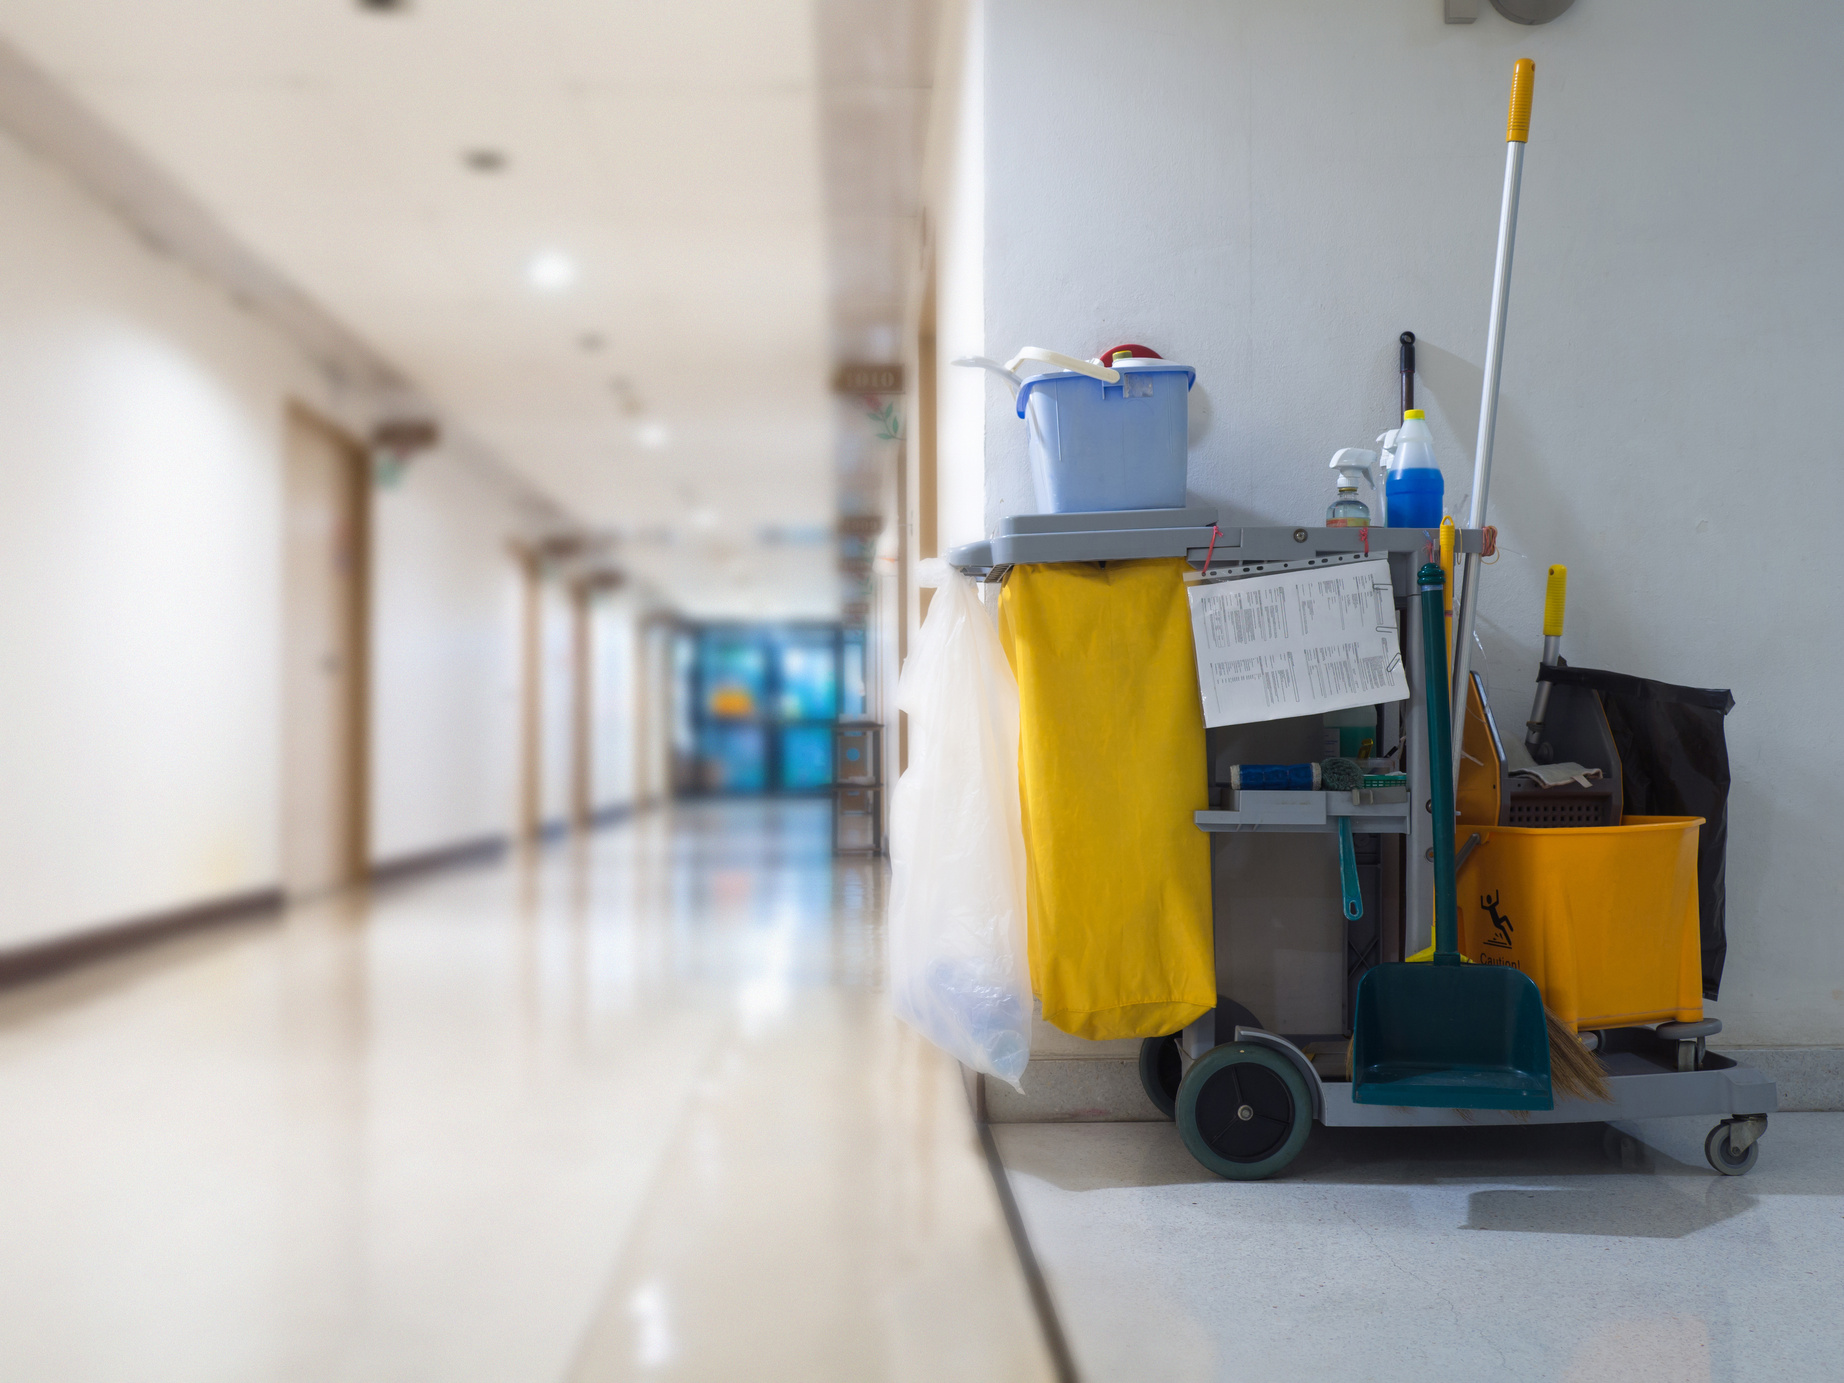 Cleaning tools cart wait for maid or cleaner in the hospital